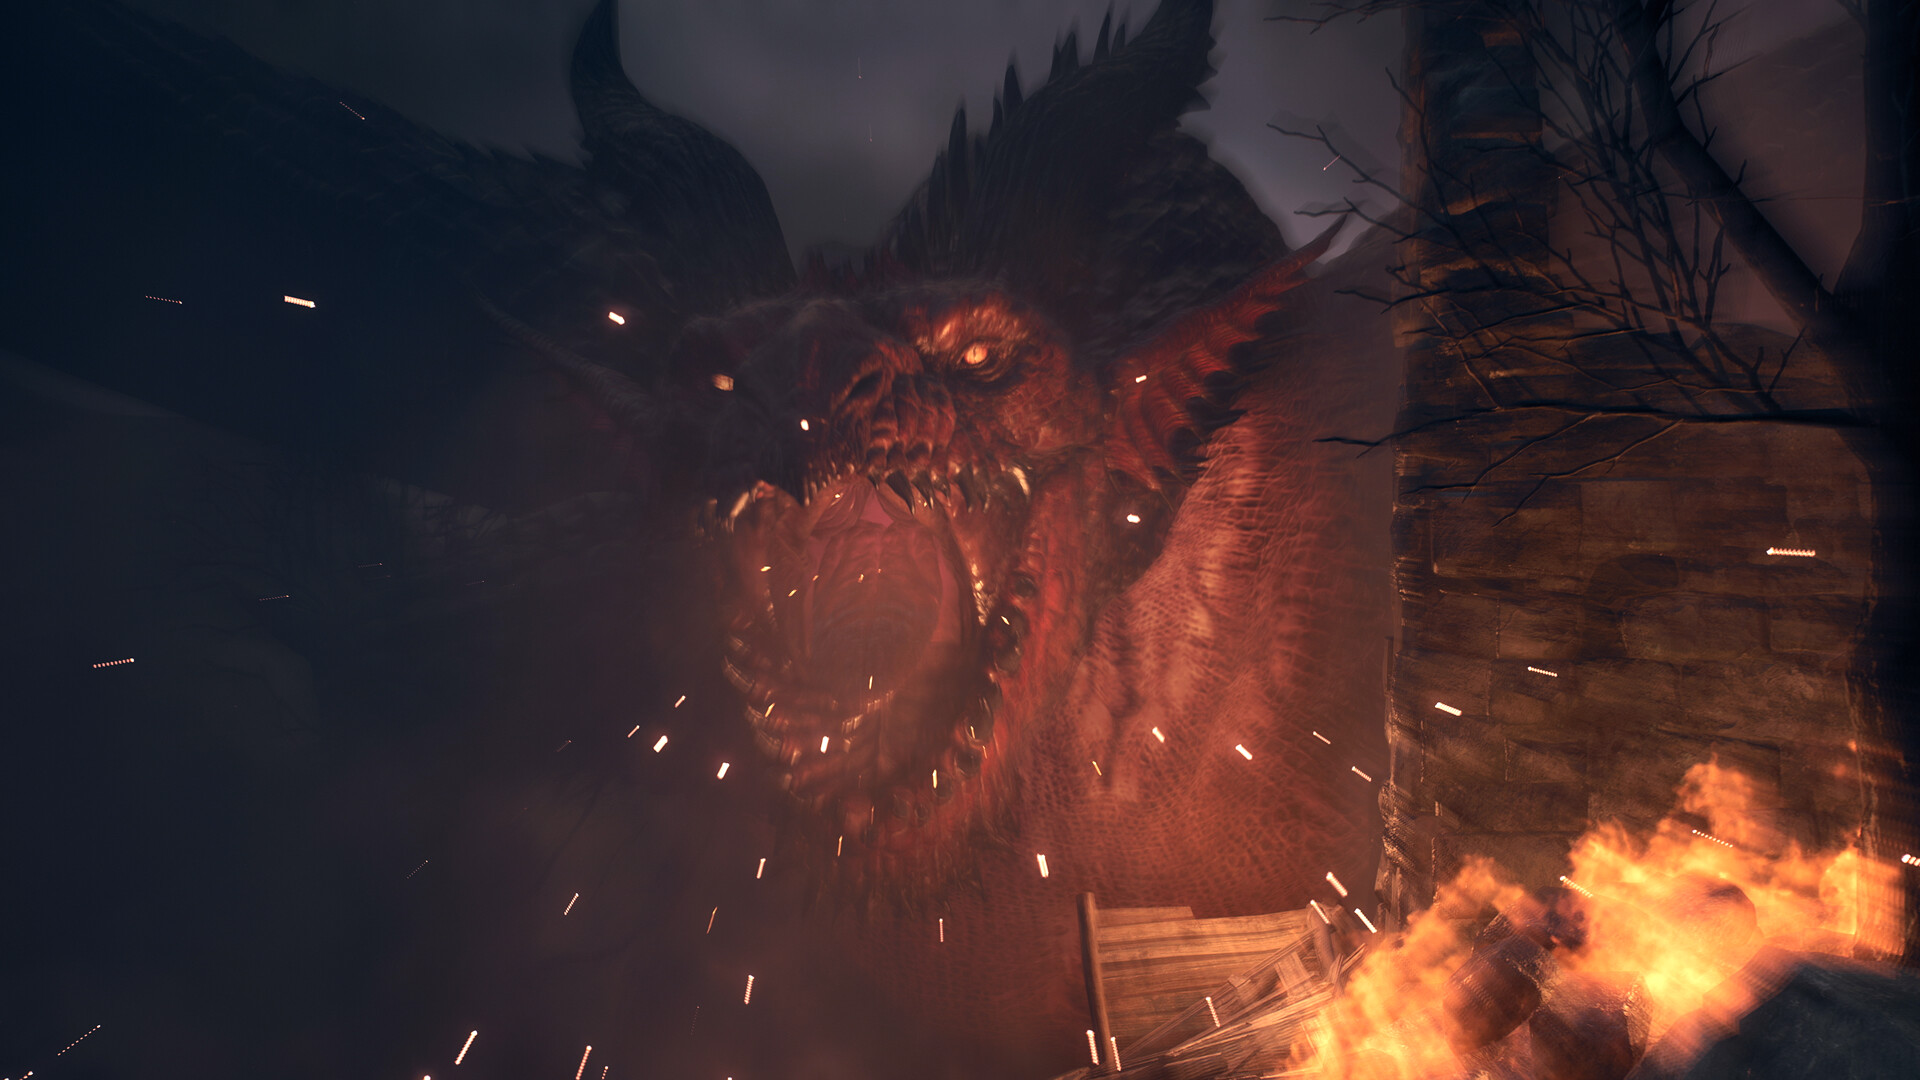 A Dragon’s Dogma 2 demo may be on the way, if the prophecy foretold by SteamDB proves true